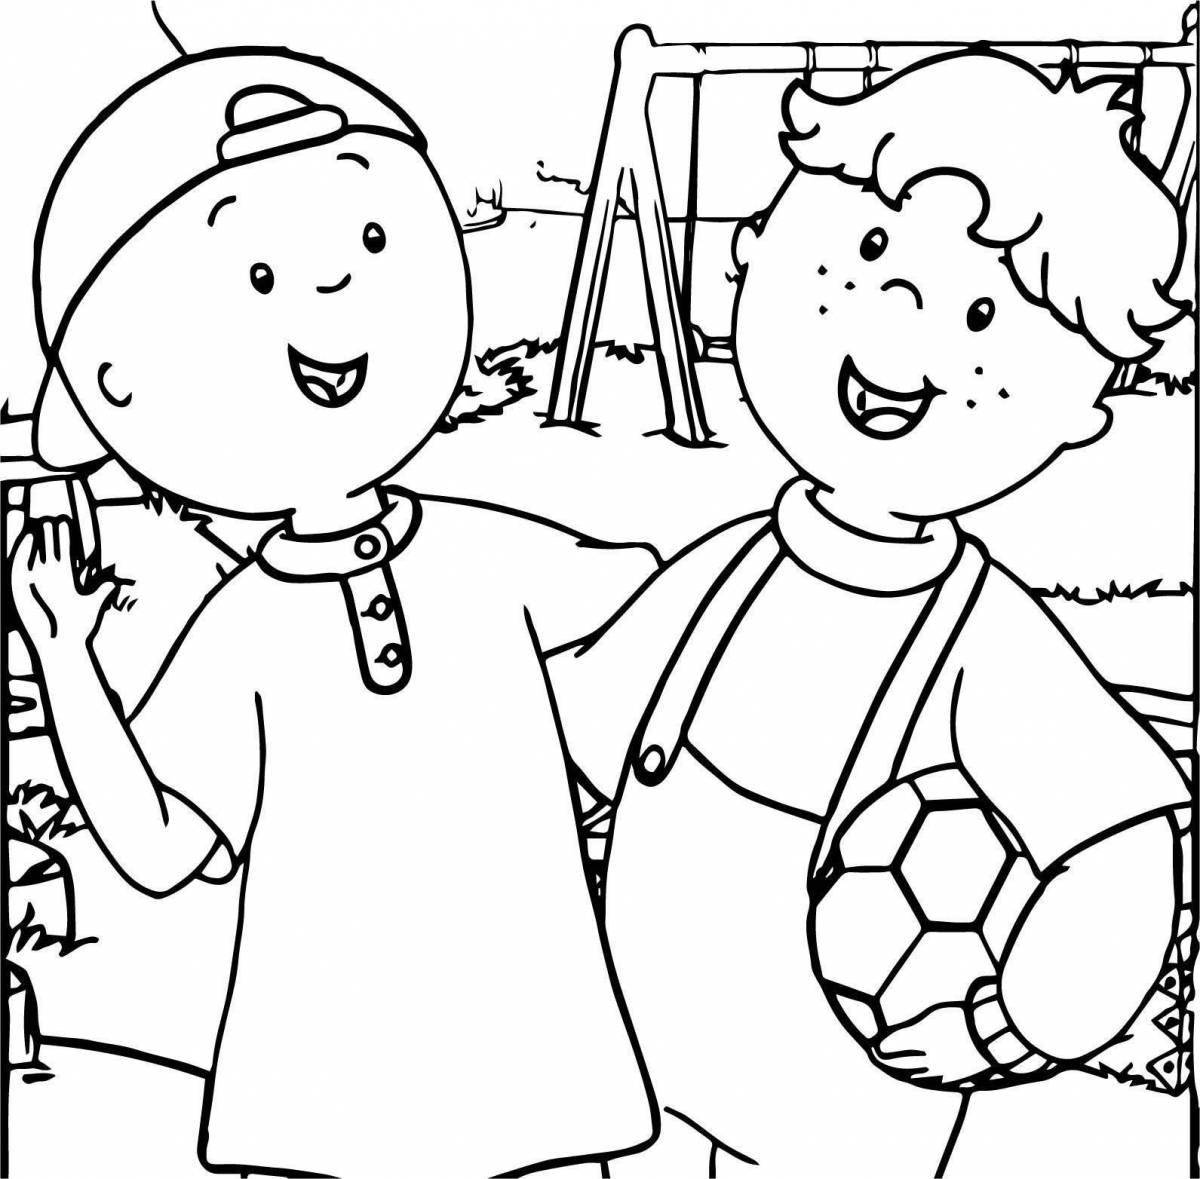 Coloring-journey coloring page other